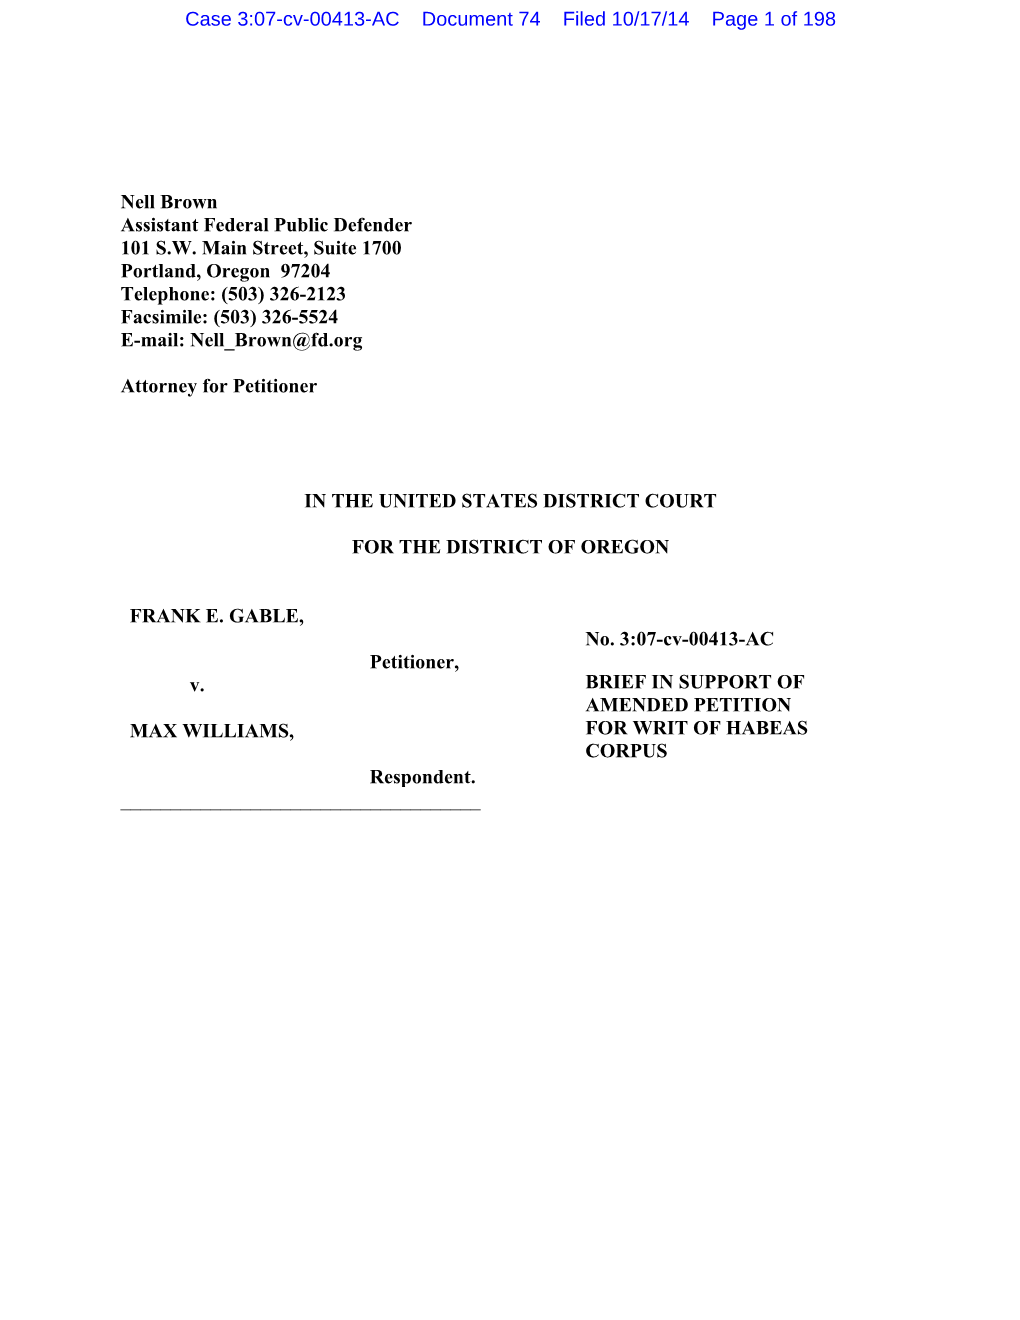 Case 3:07-Cv-00413-AC Document 74 Filed 10/17/14 Page 1 of 198